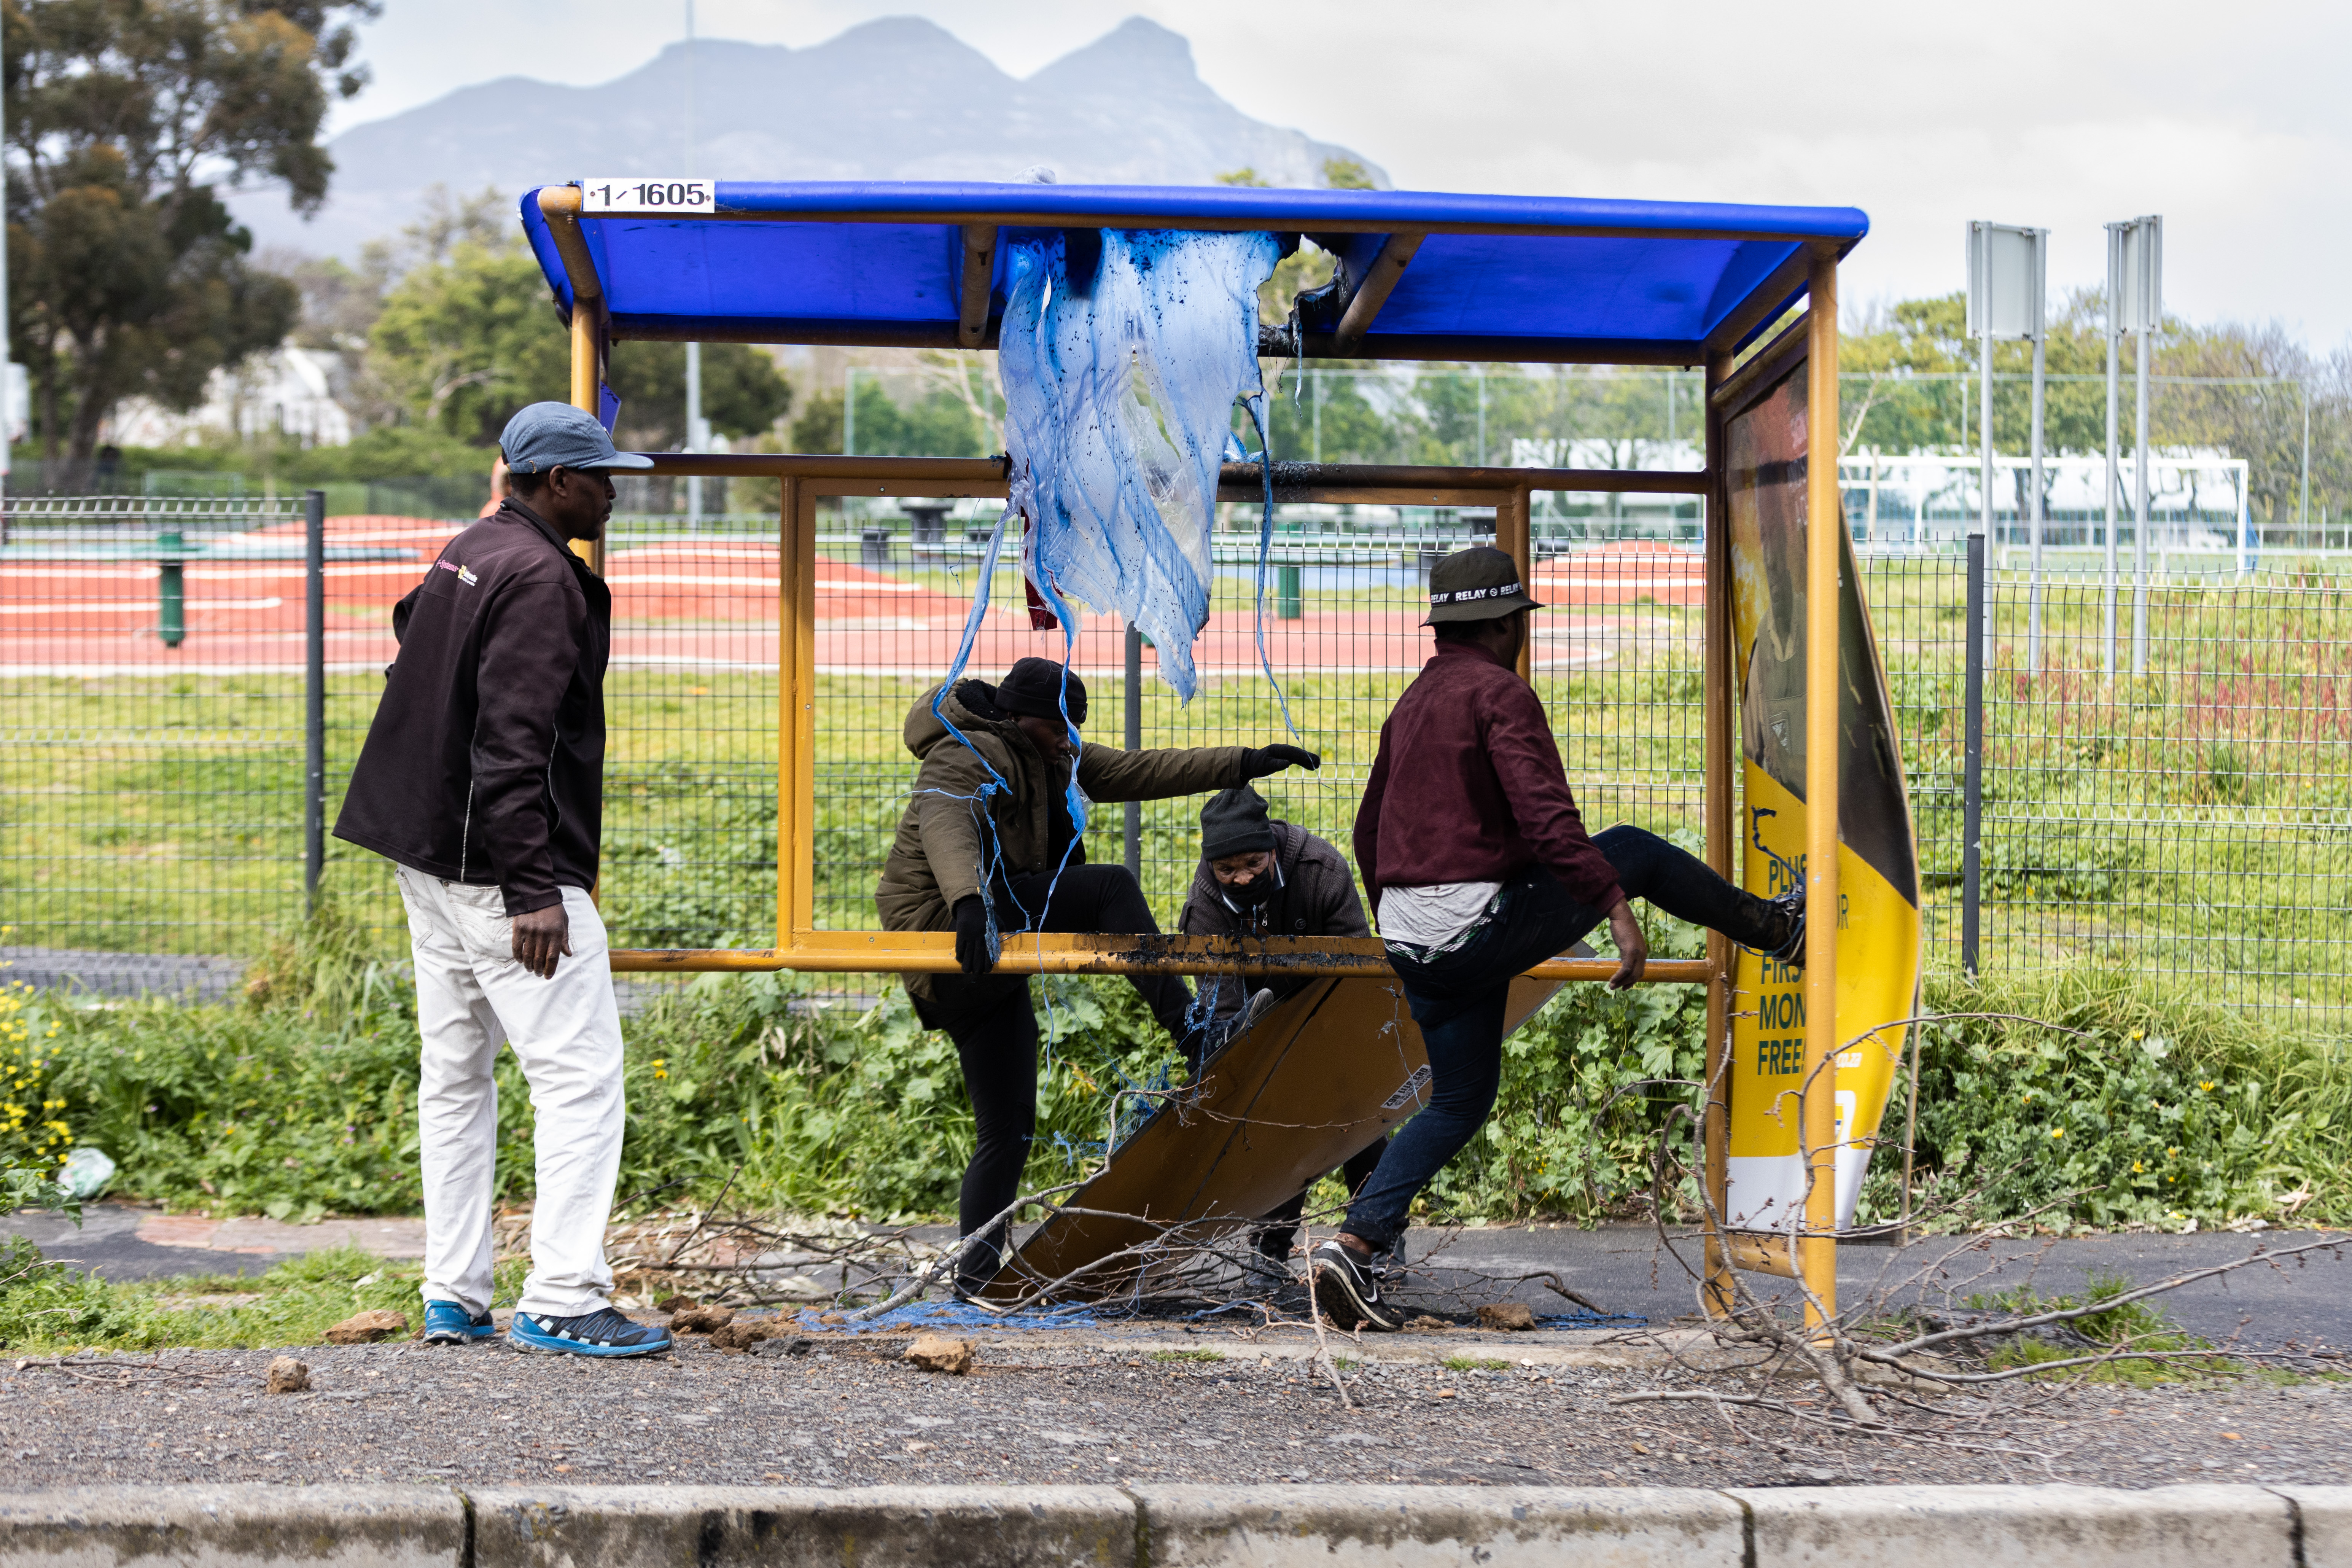 Taxi drivers vandalising a bus stop